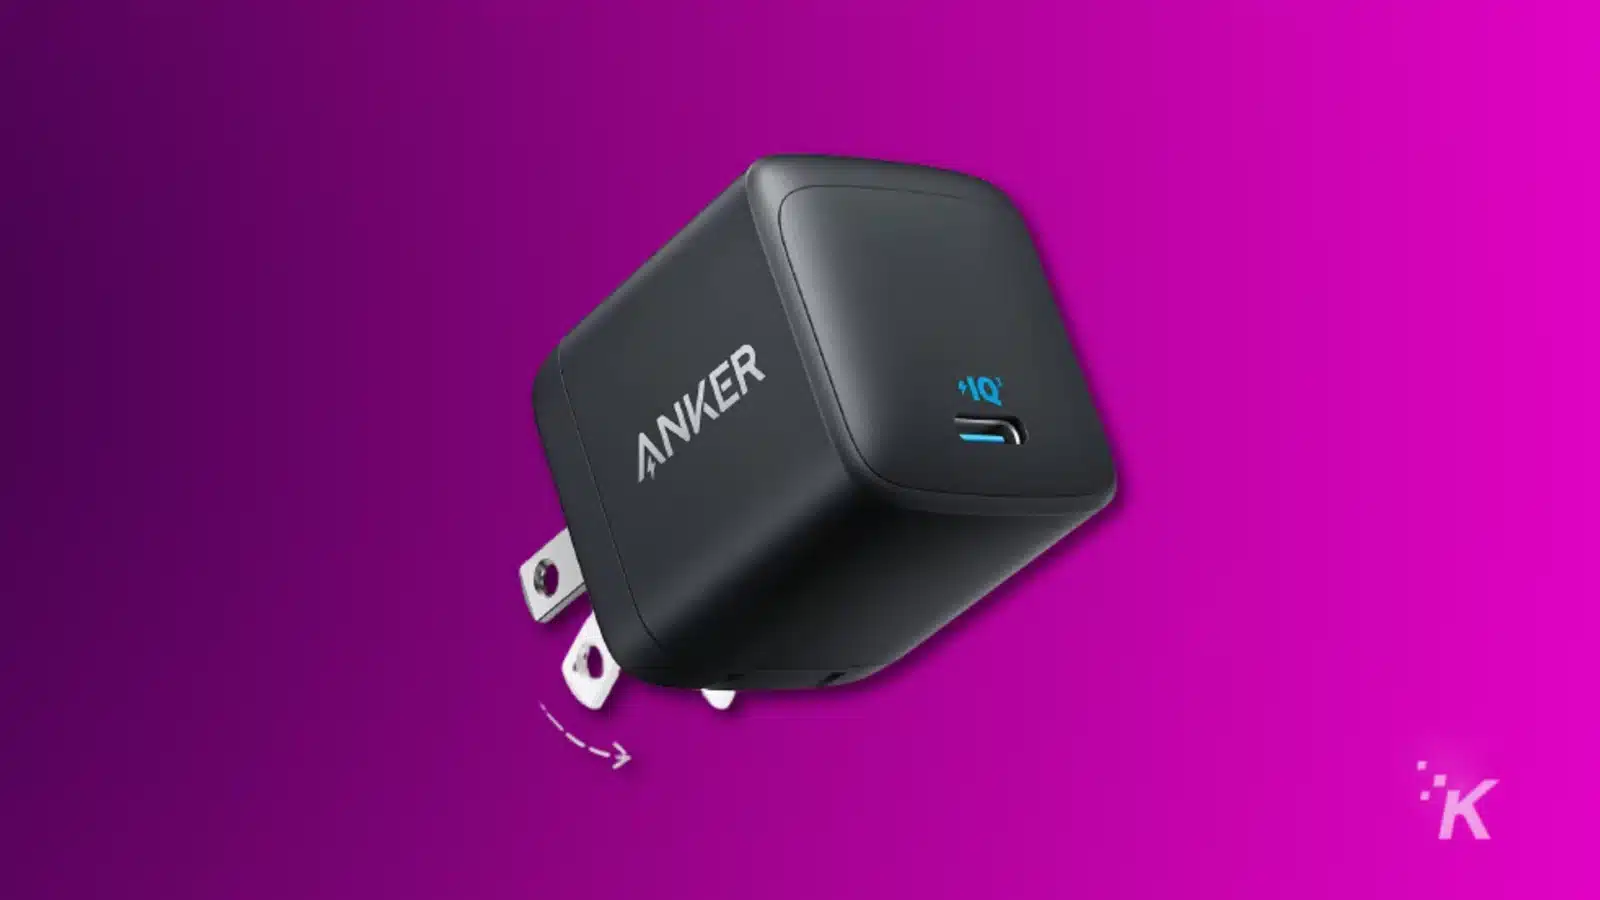 Anker 313 45w fast charger on purple background